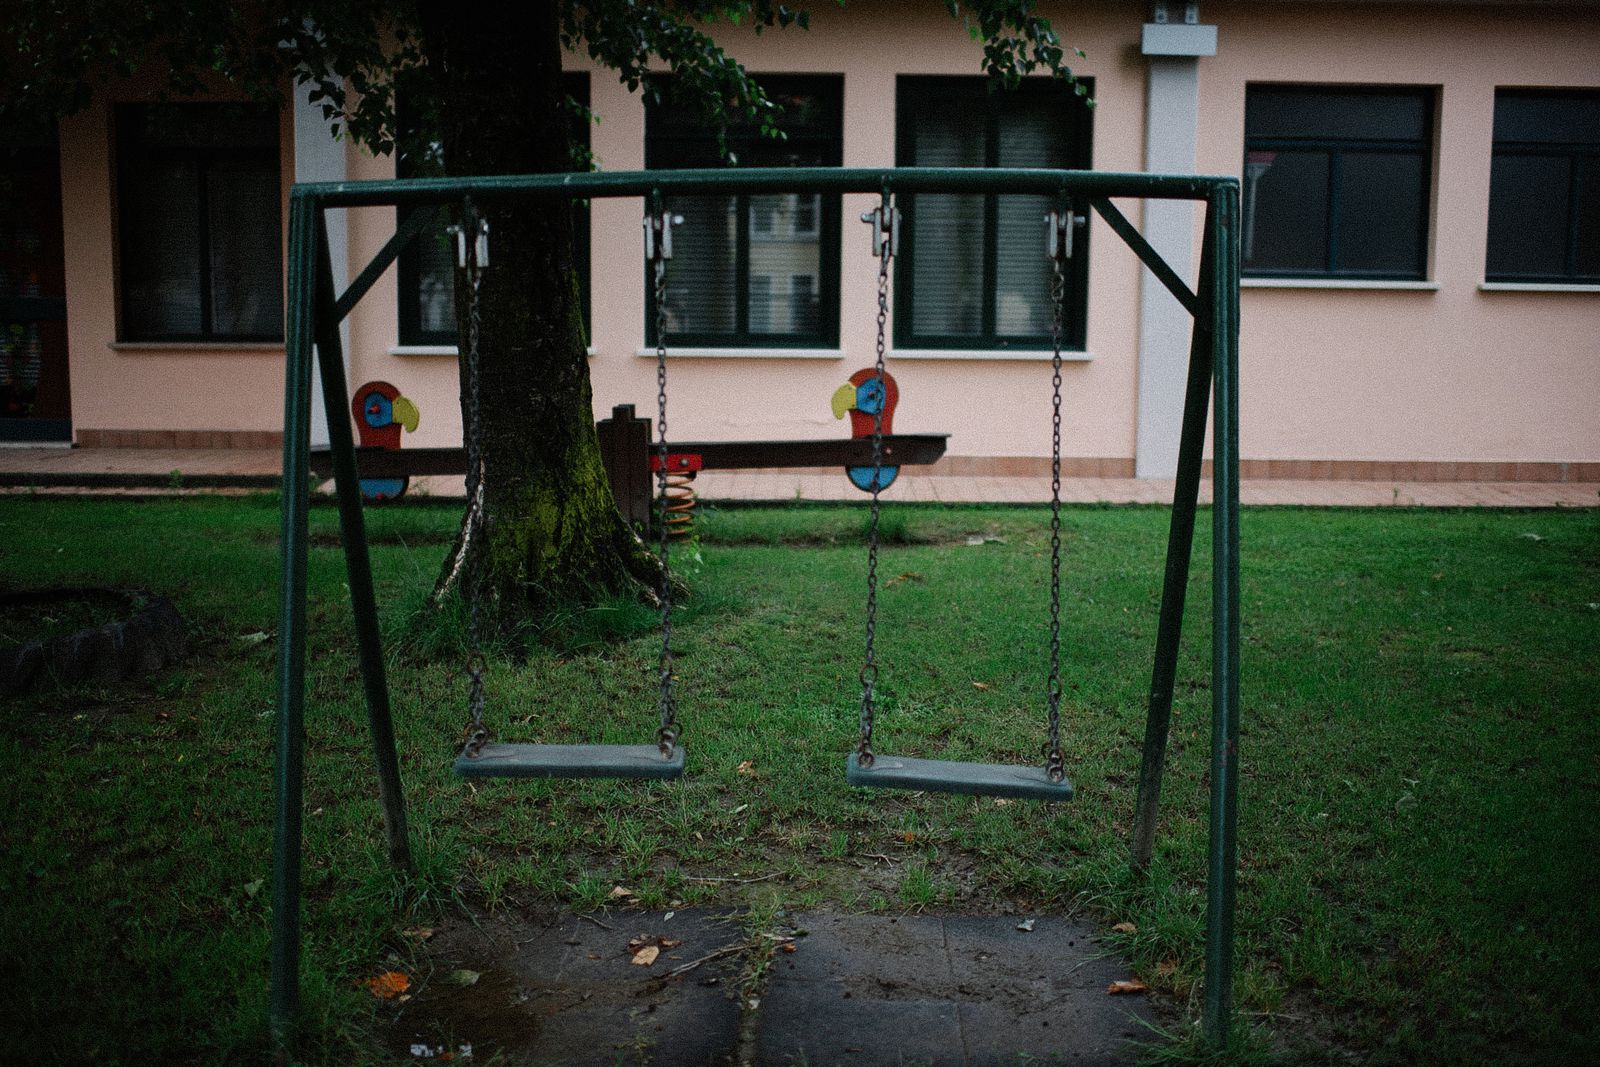 © Maurizio Gjivovich - Image from the Italian school on lockdown photography project